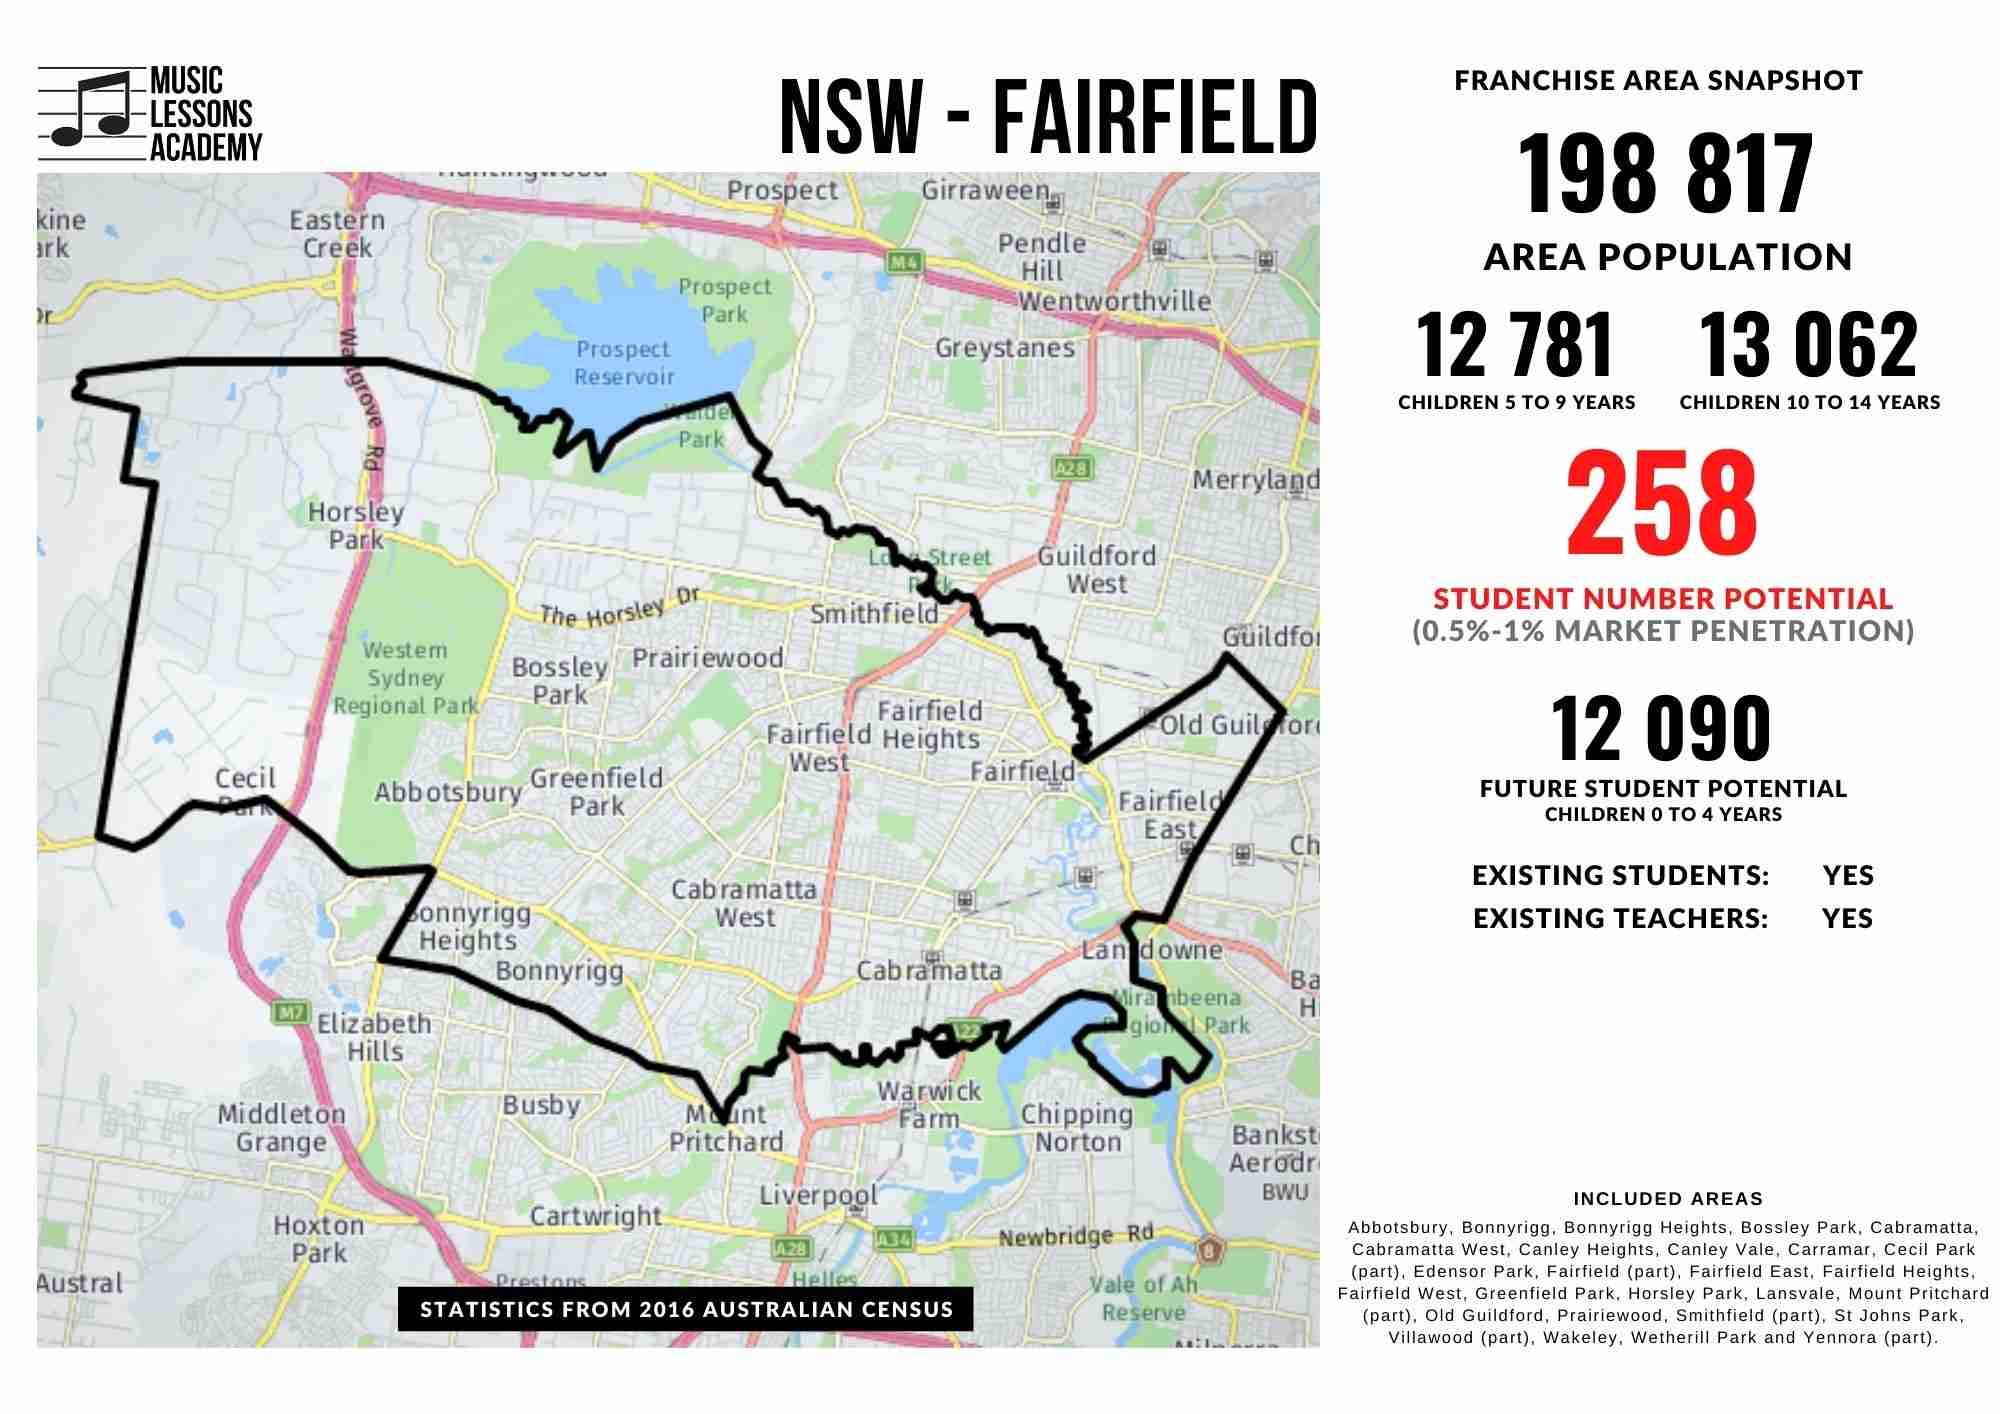 NSW Fairfield Franchise for sale